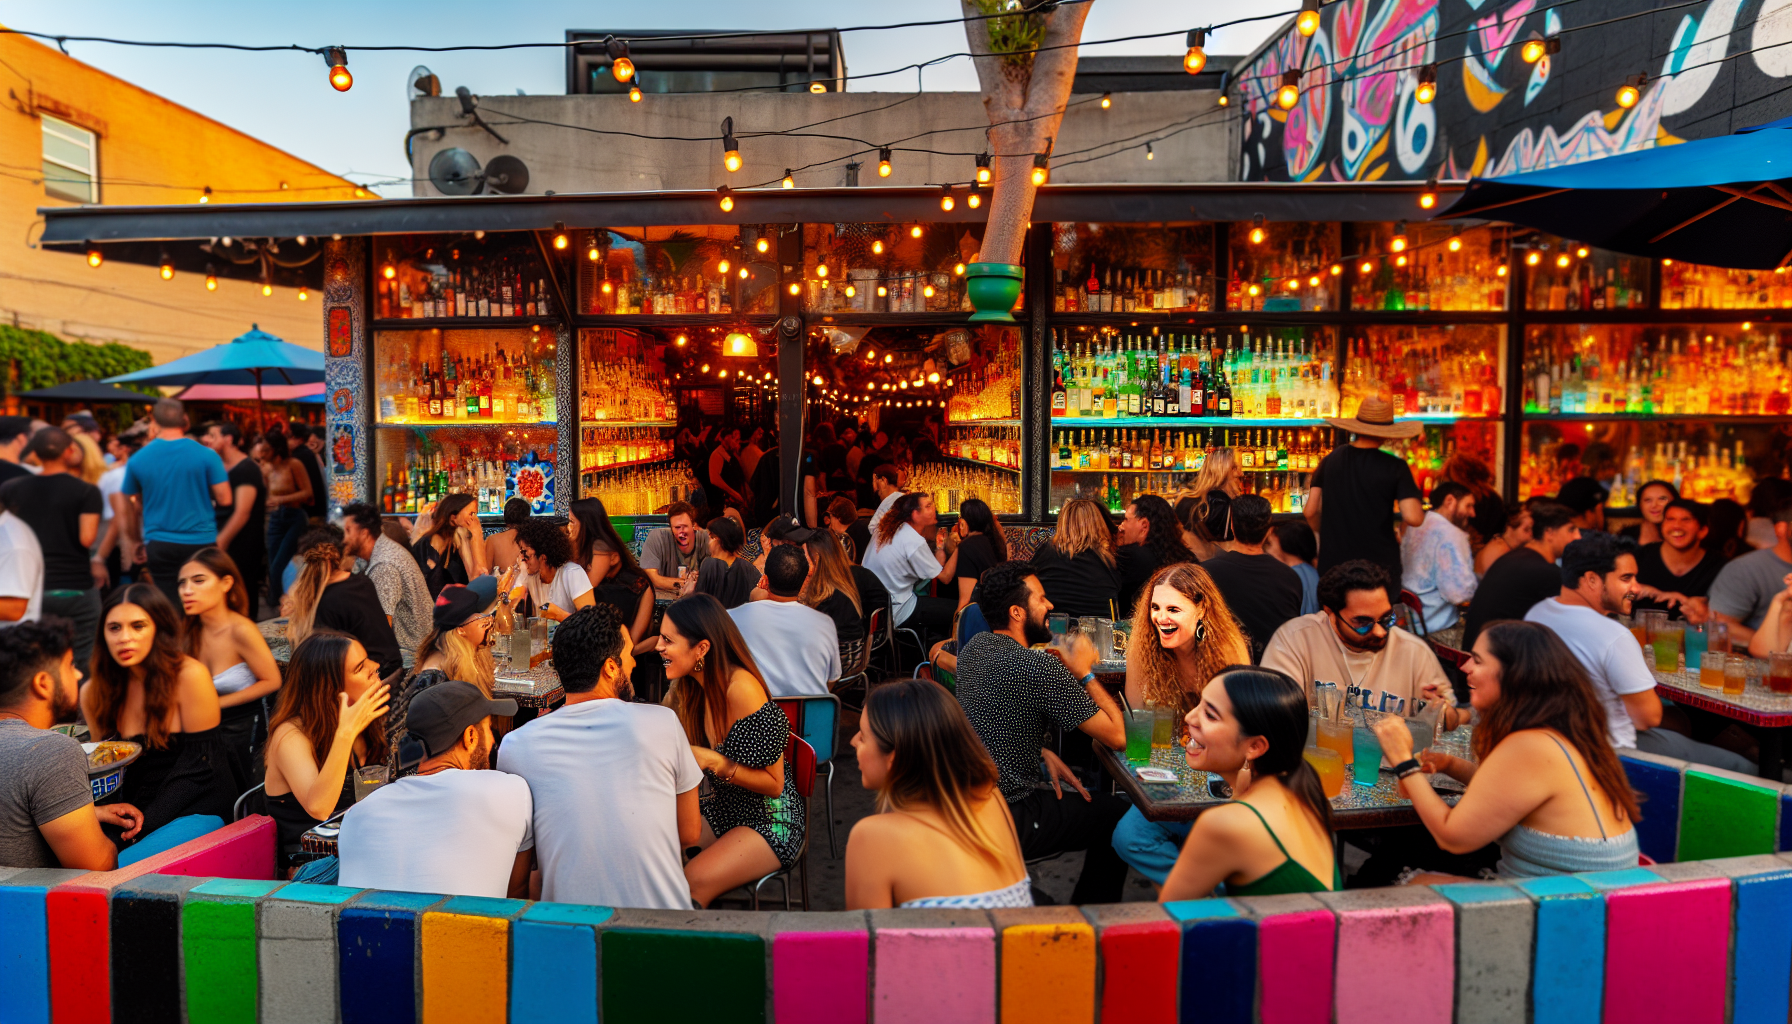 Lively outdoor seating and tequila selection at Drunken Taco on Las Olas Blvd